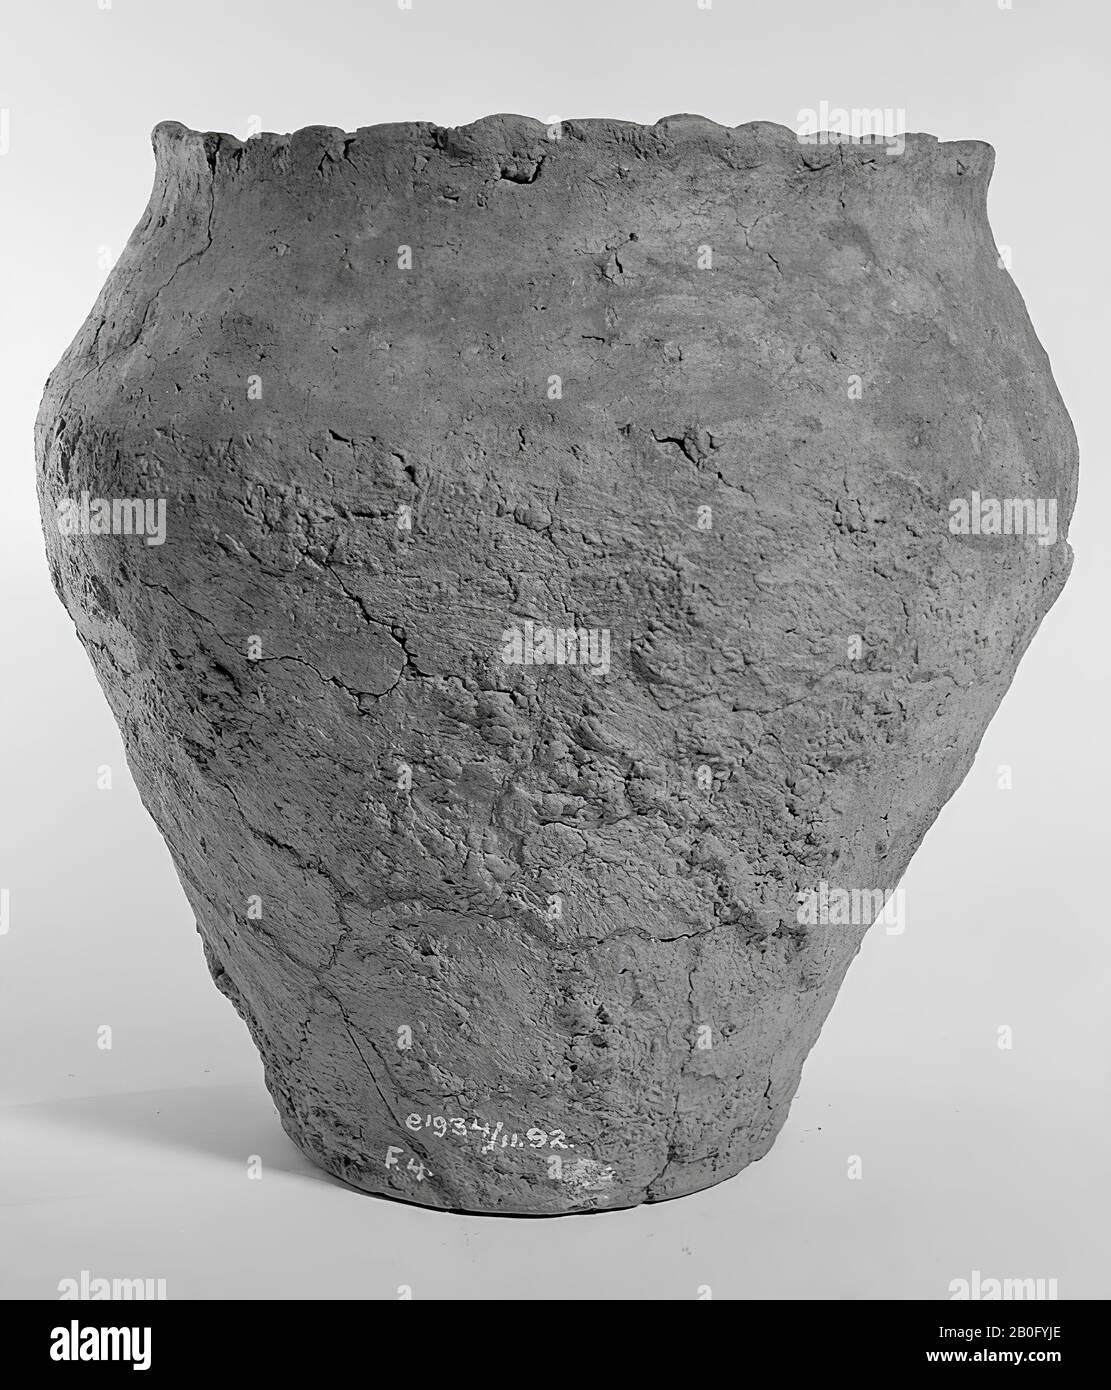 Germanic urn of earthenware with serrated edge. Old bondings and additions. Contains cremated residues, urn, earthenware, h: 22.1 cm, diam: 21.5 cm, prehistory -800 Stock Photo